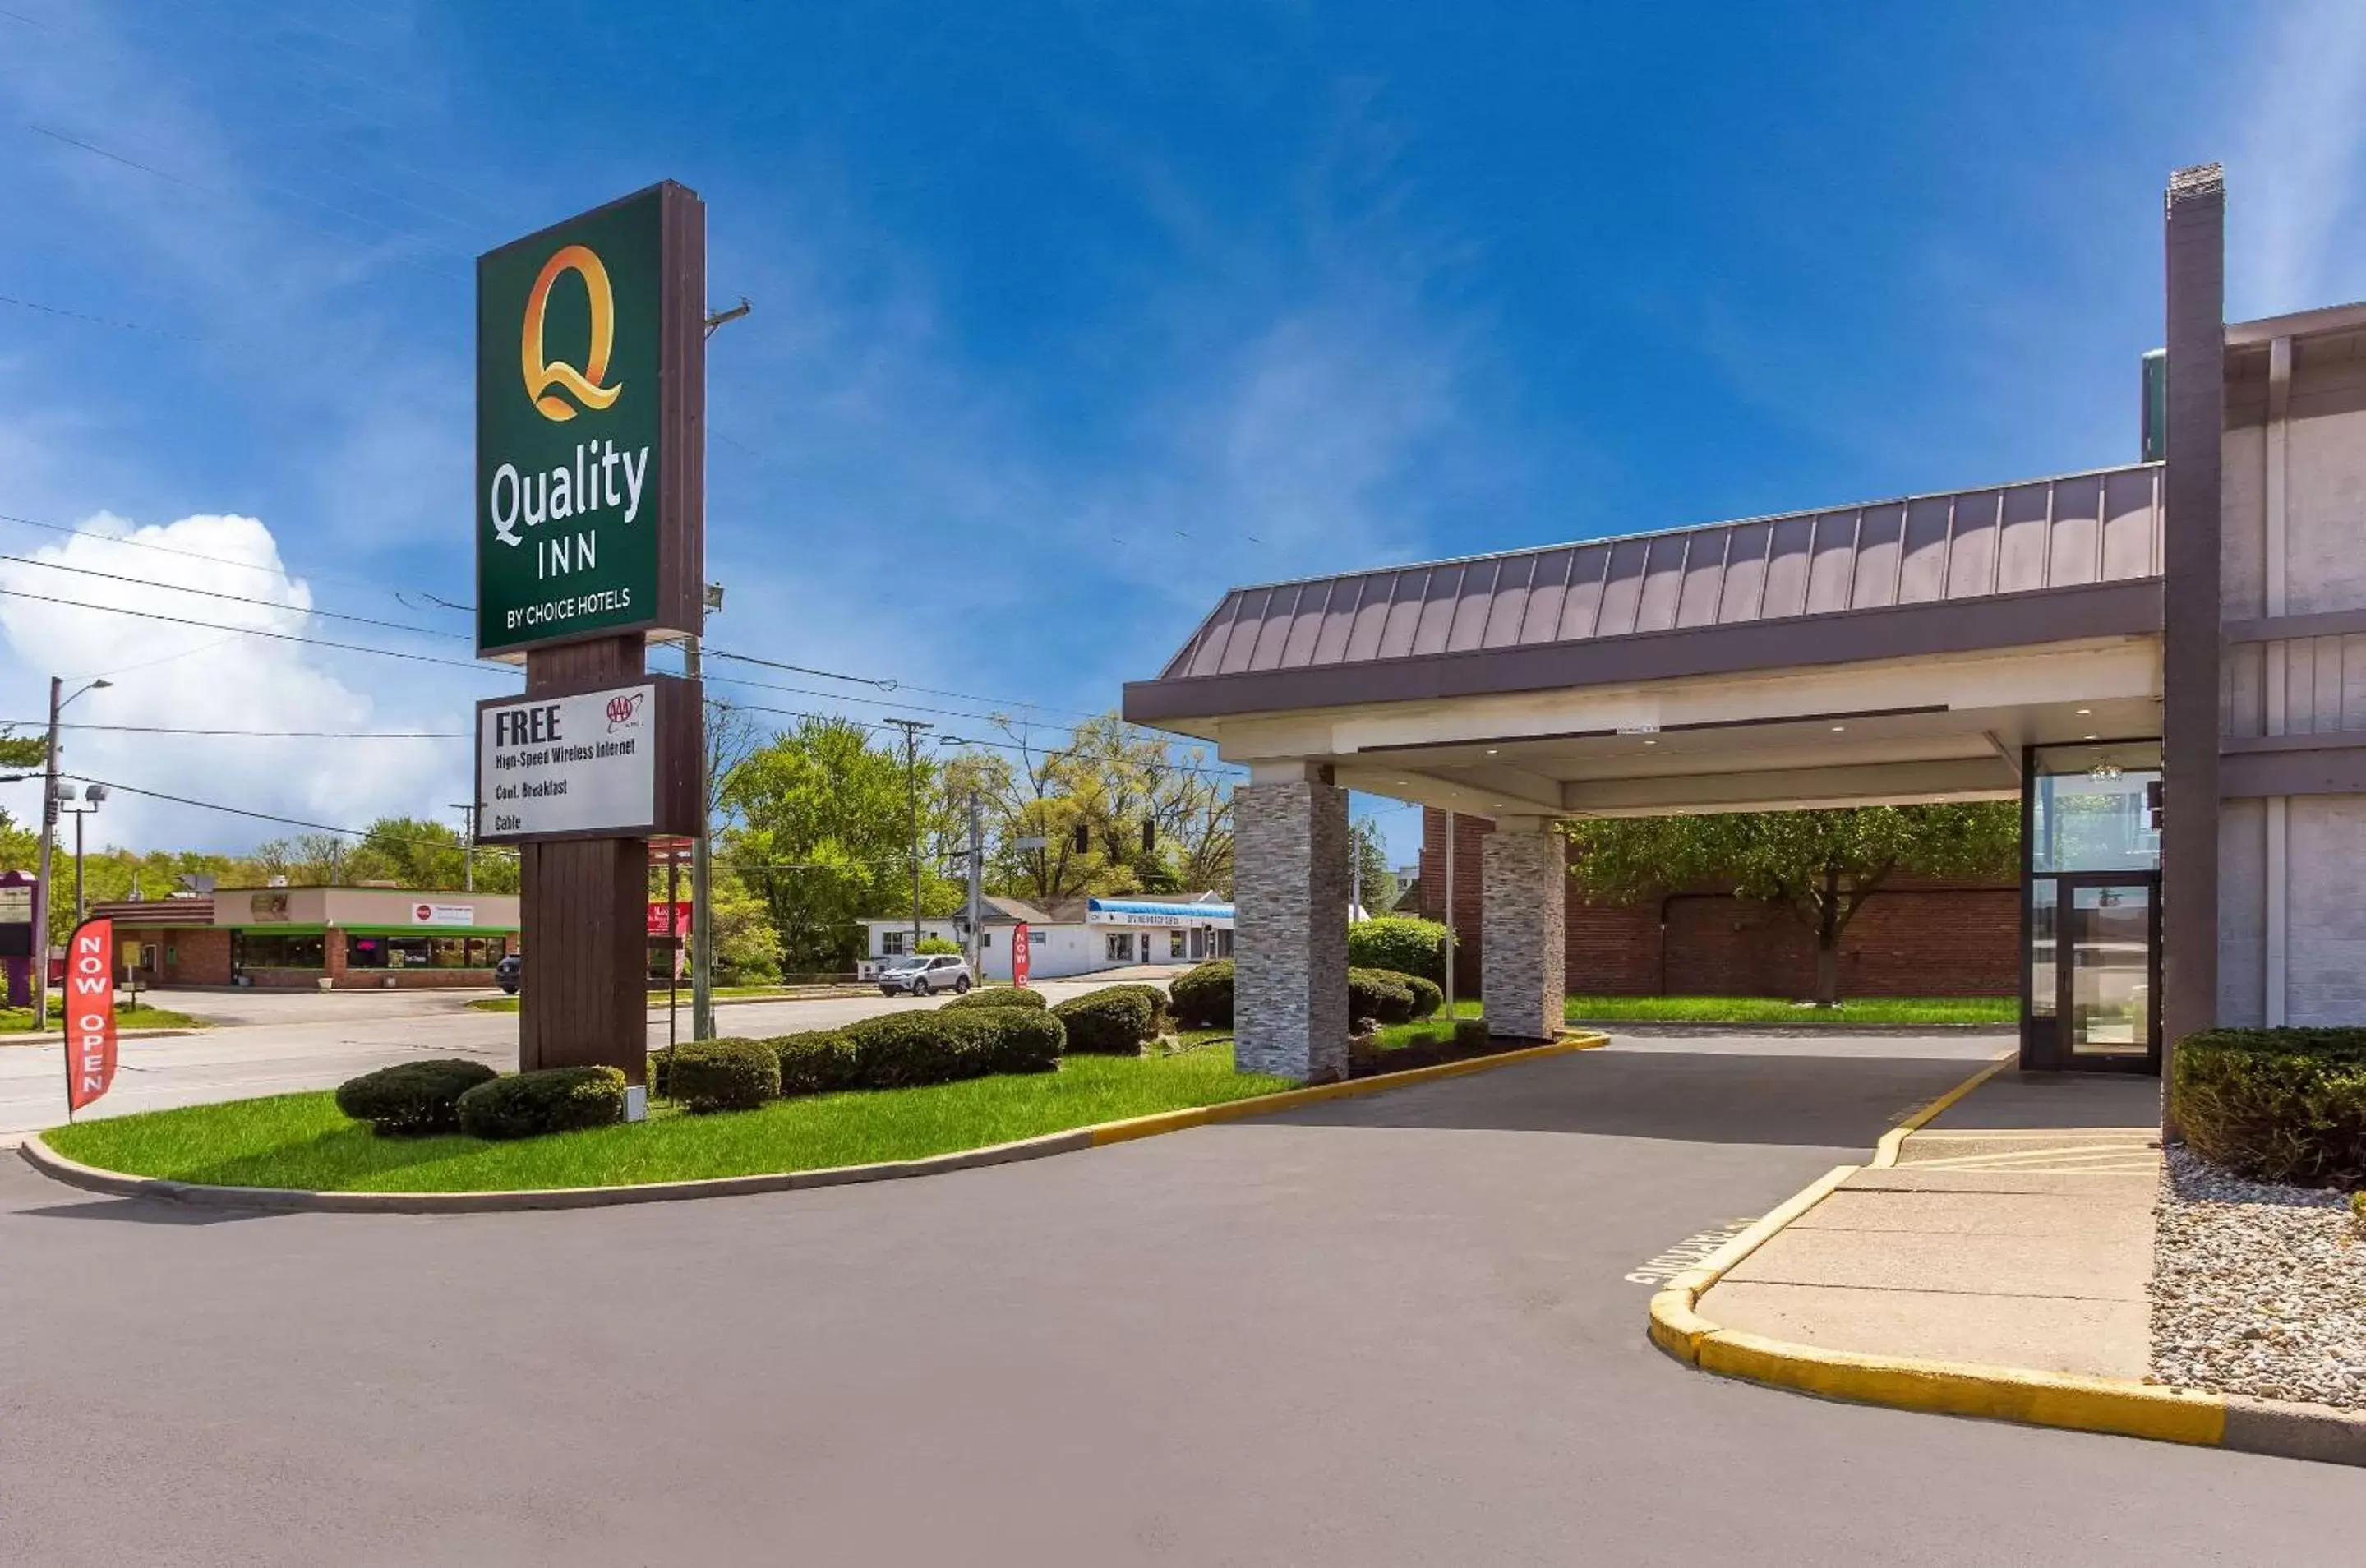 Property Building in Quality Inn South Bend near Notre Dame